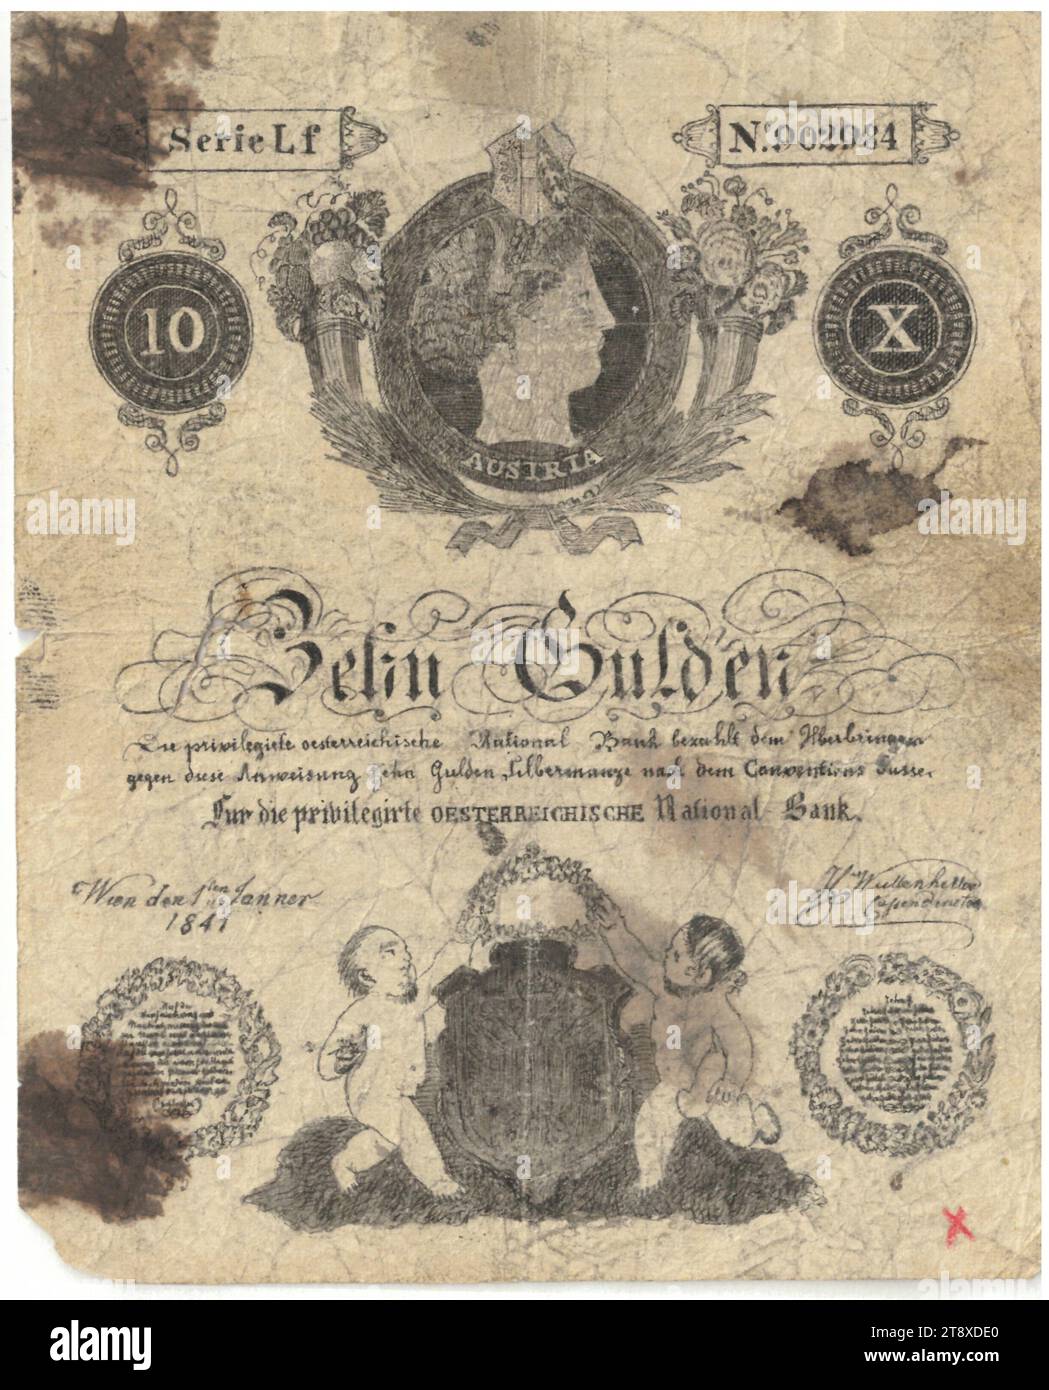 Instruction (counterfeit), 10 florins, Privilegierte Österreichische National-Bank, mint authority, Date after 01.01.1841, paper, printing, height 128 mm, width 102 mm, Mint, Vienna, Mint territory, Austria, Empire (1804-1867), Finance, counterfeit, forgery, woman, child, coat of arms (as symbol of the state, etc.), bank-note, money, The Vienna Collection Stock Photo